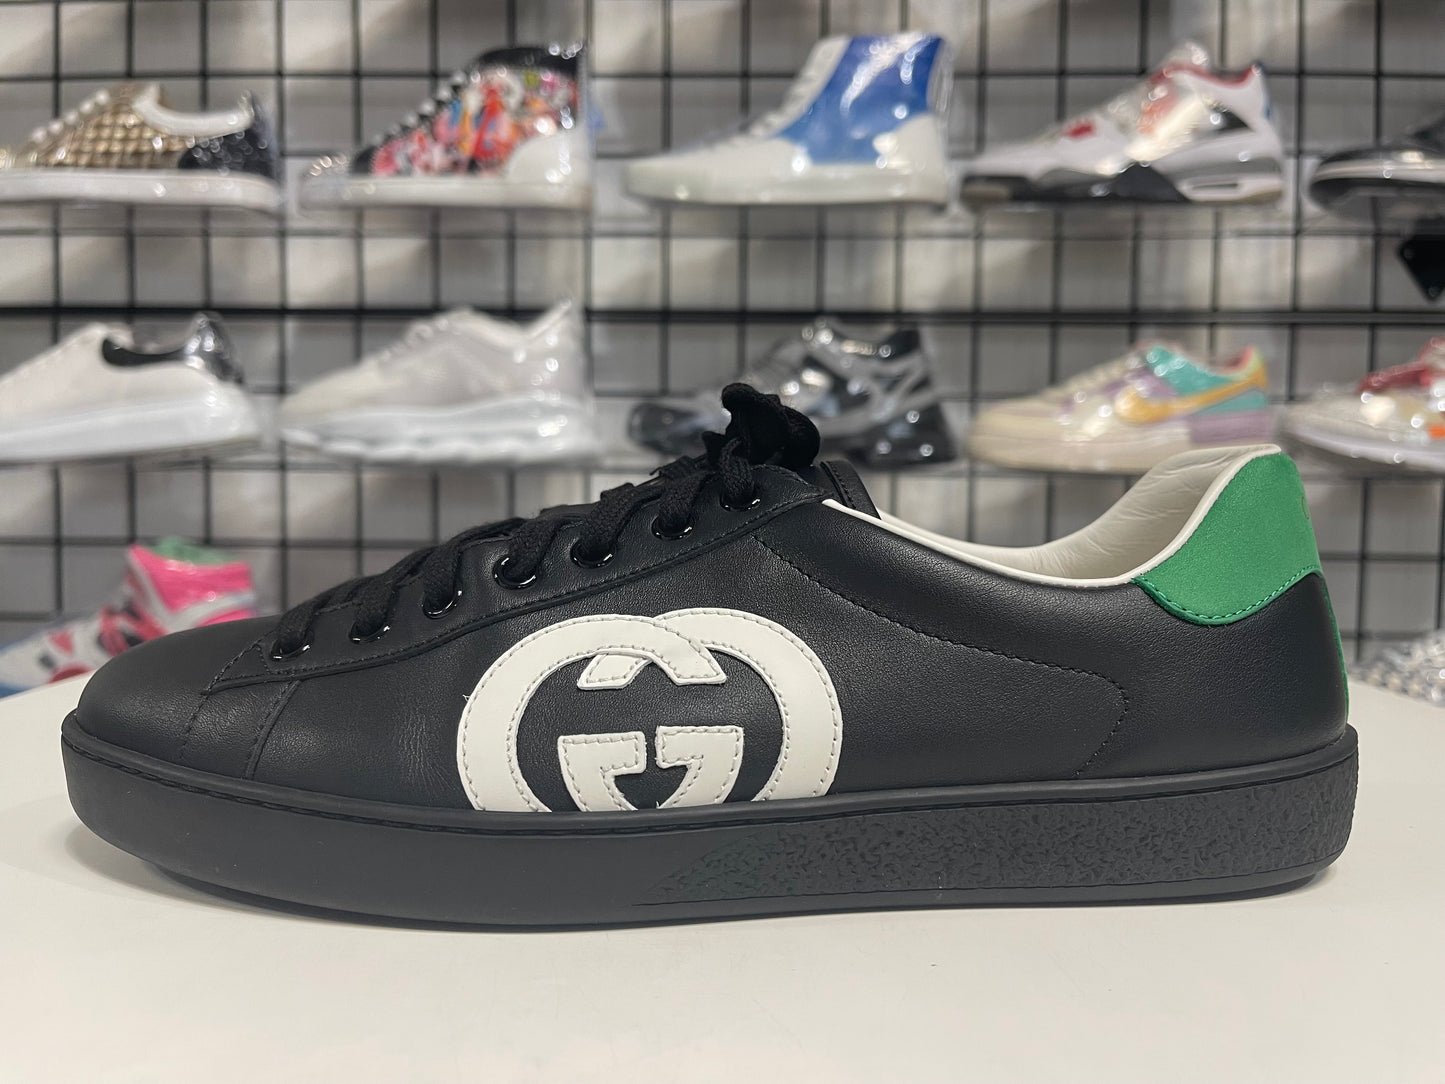 Gucci Ace Embroidered Sneaker size 7.5G